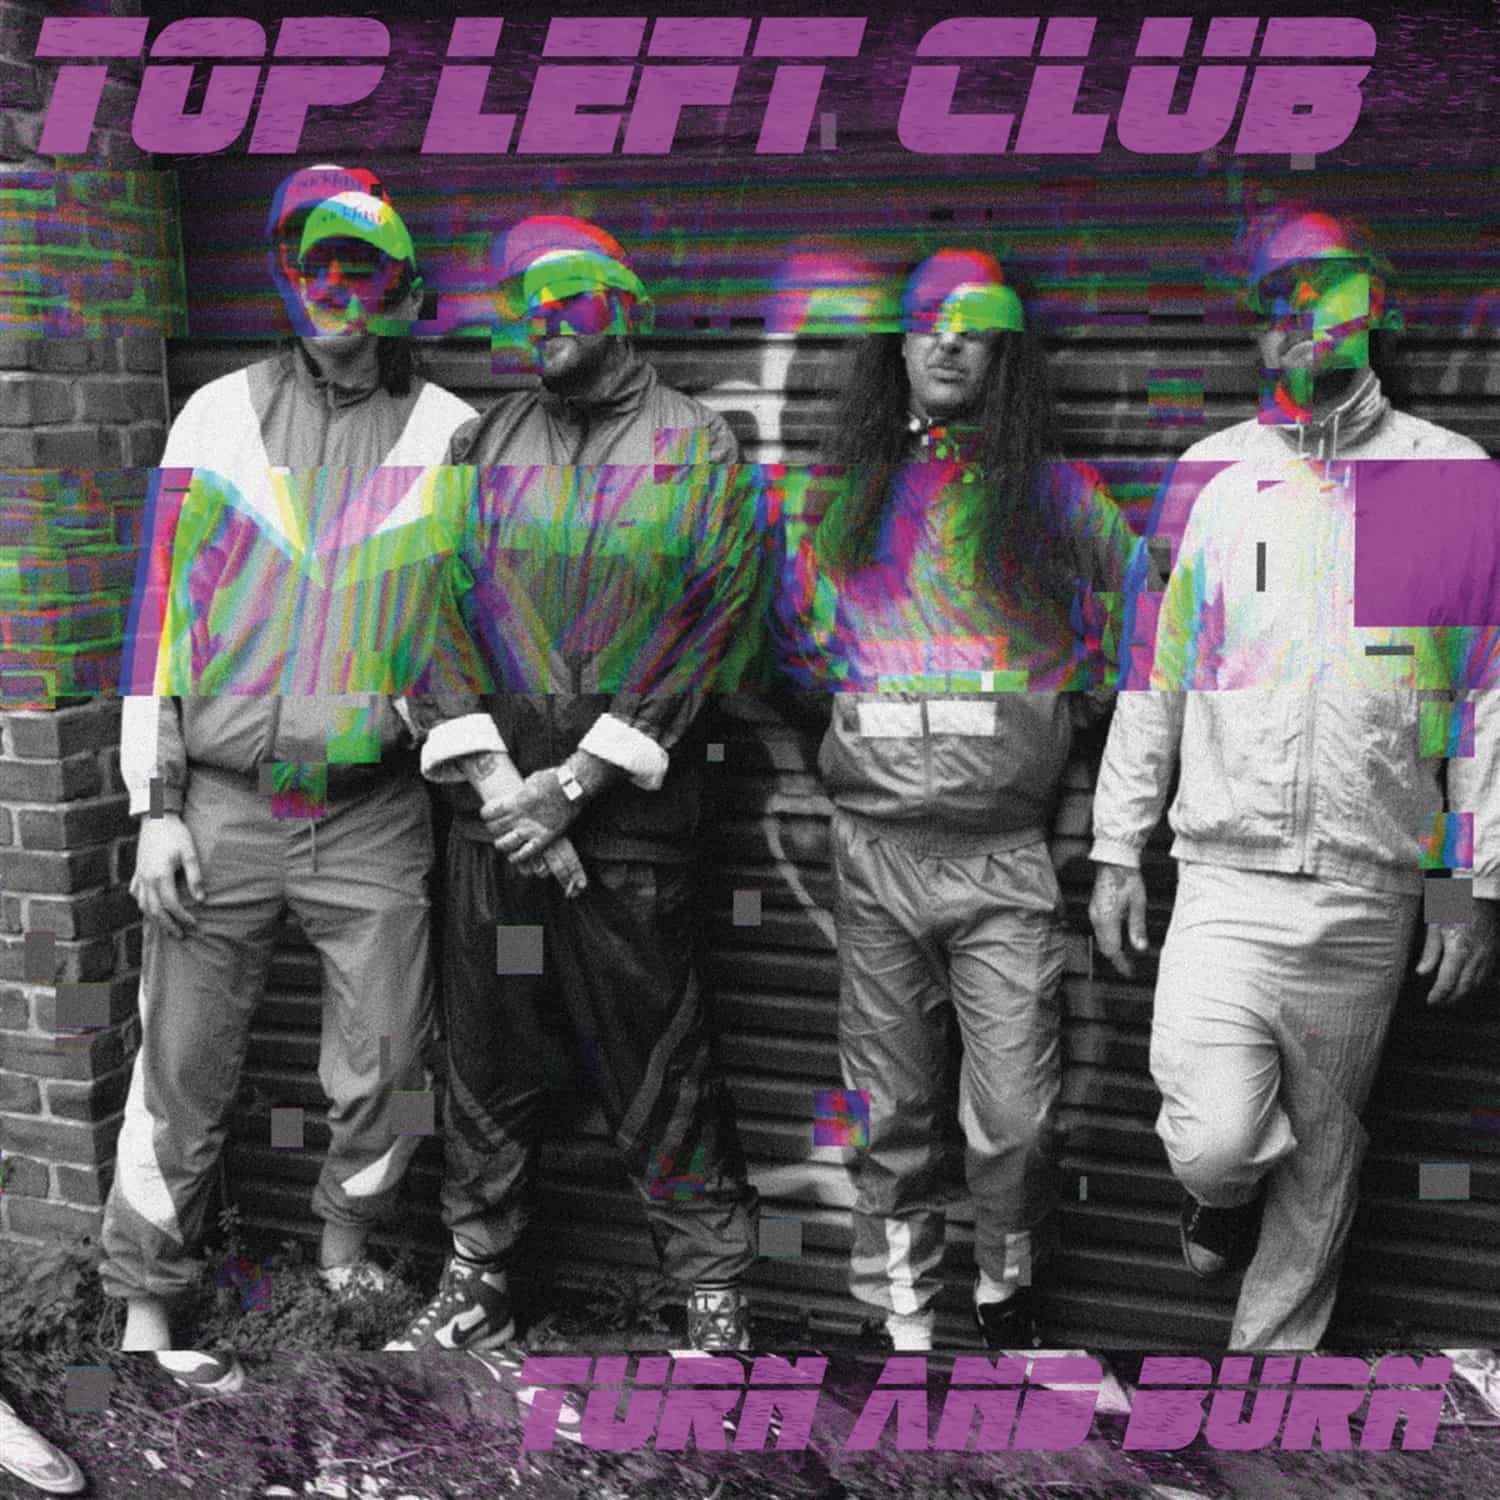 Top Left Club - TUNR AND BURN 